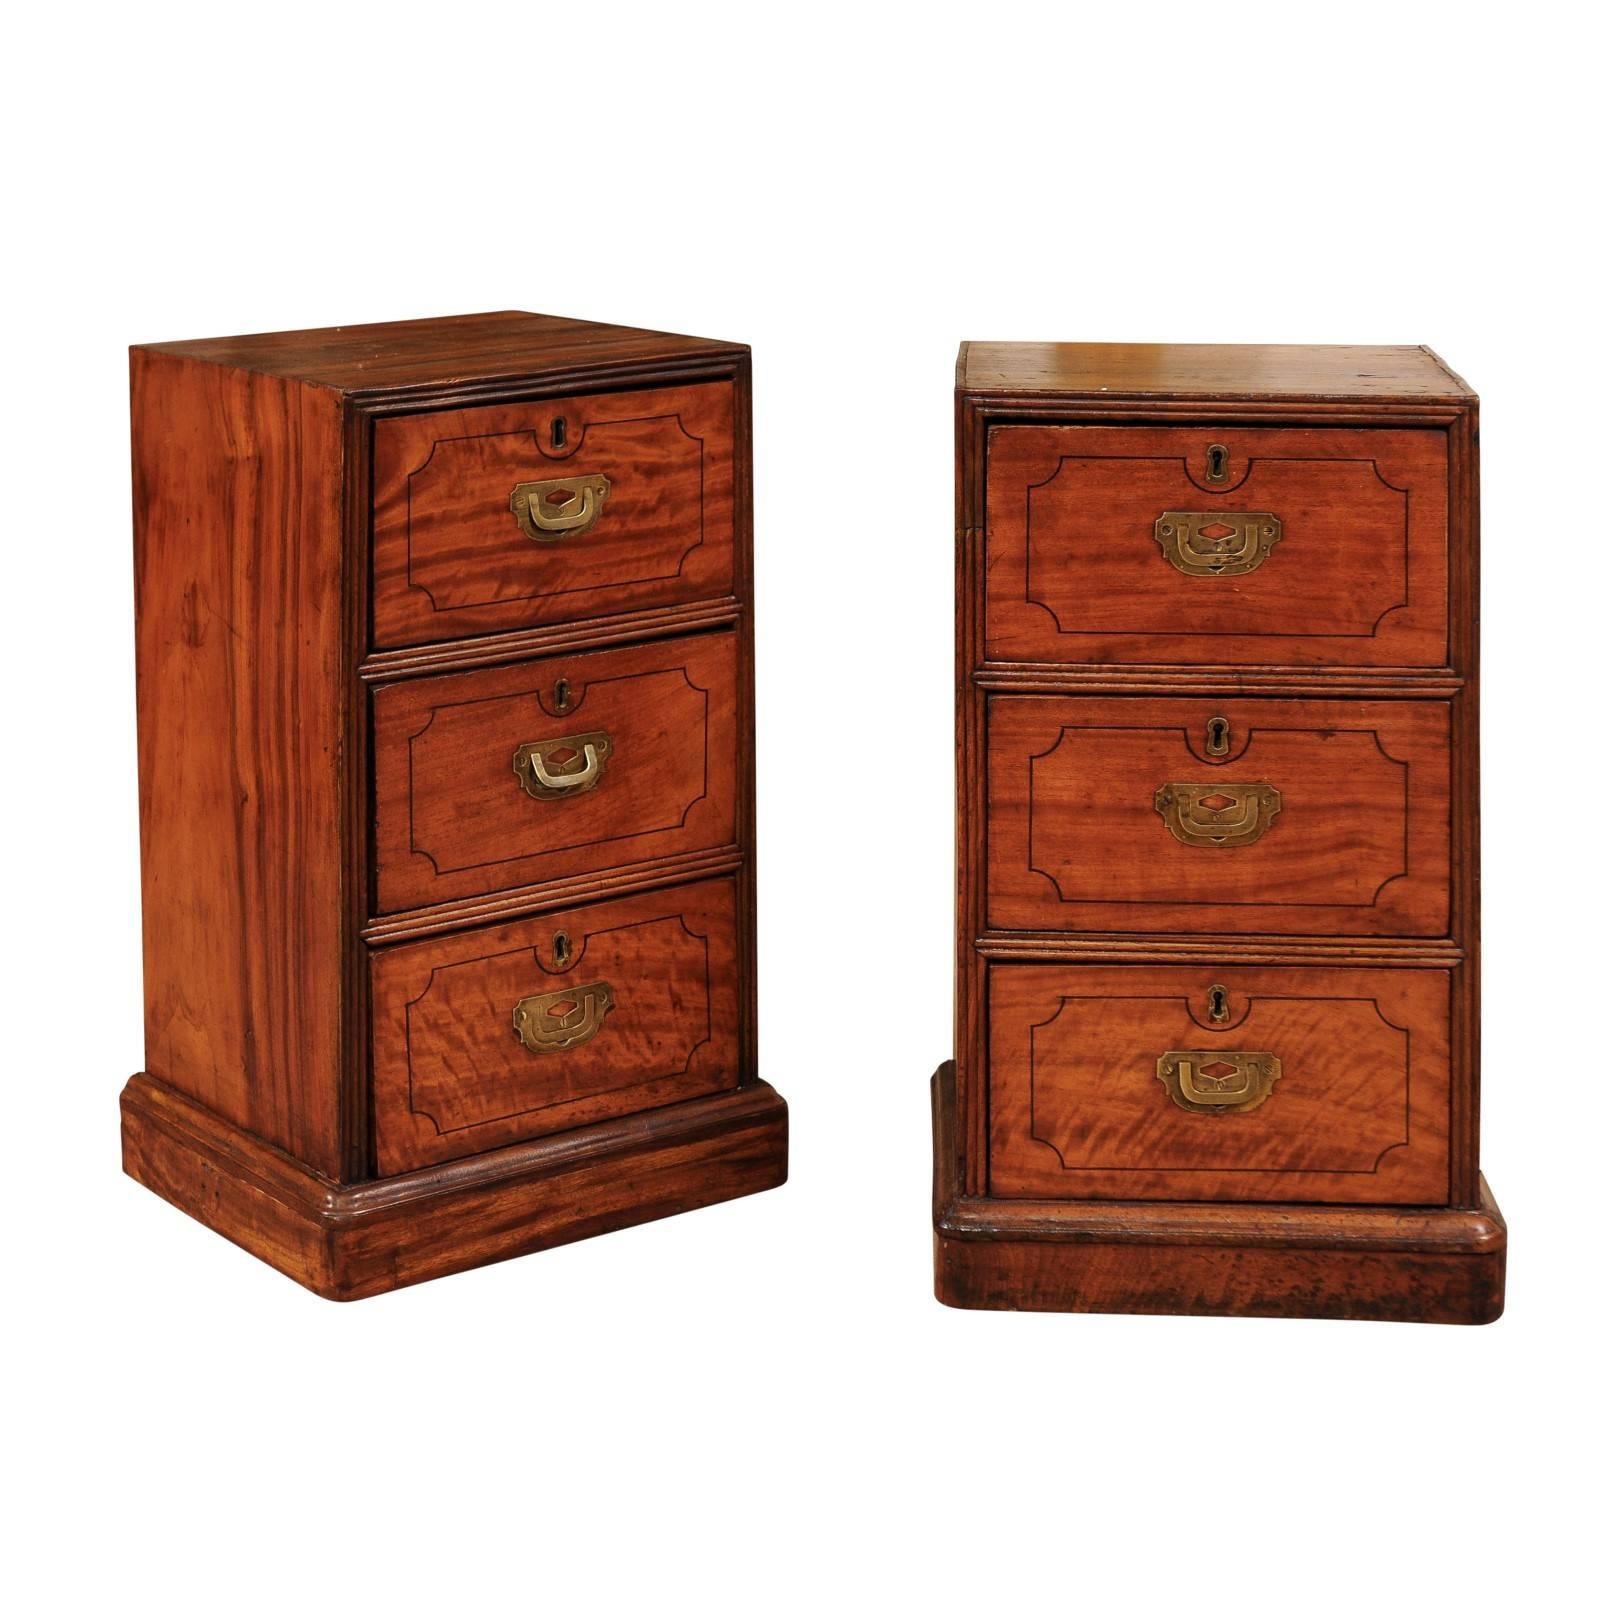 Pair of Campaign Style Bedside Tables in Mahogany with Three Drawers